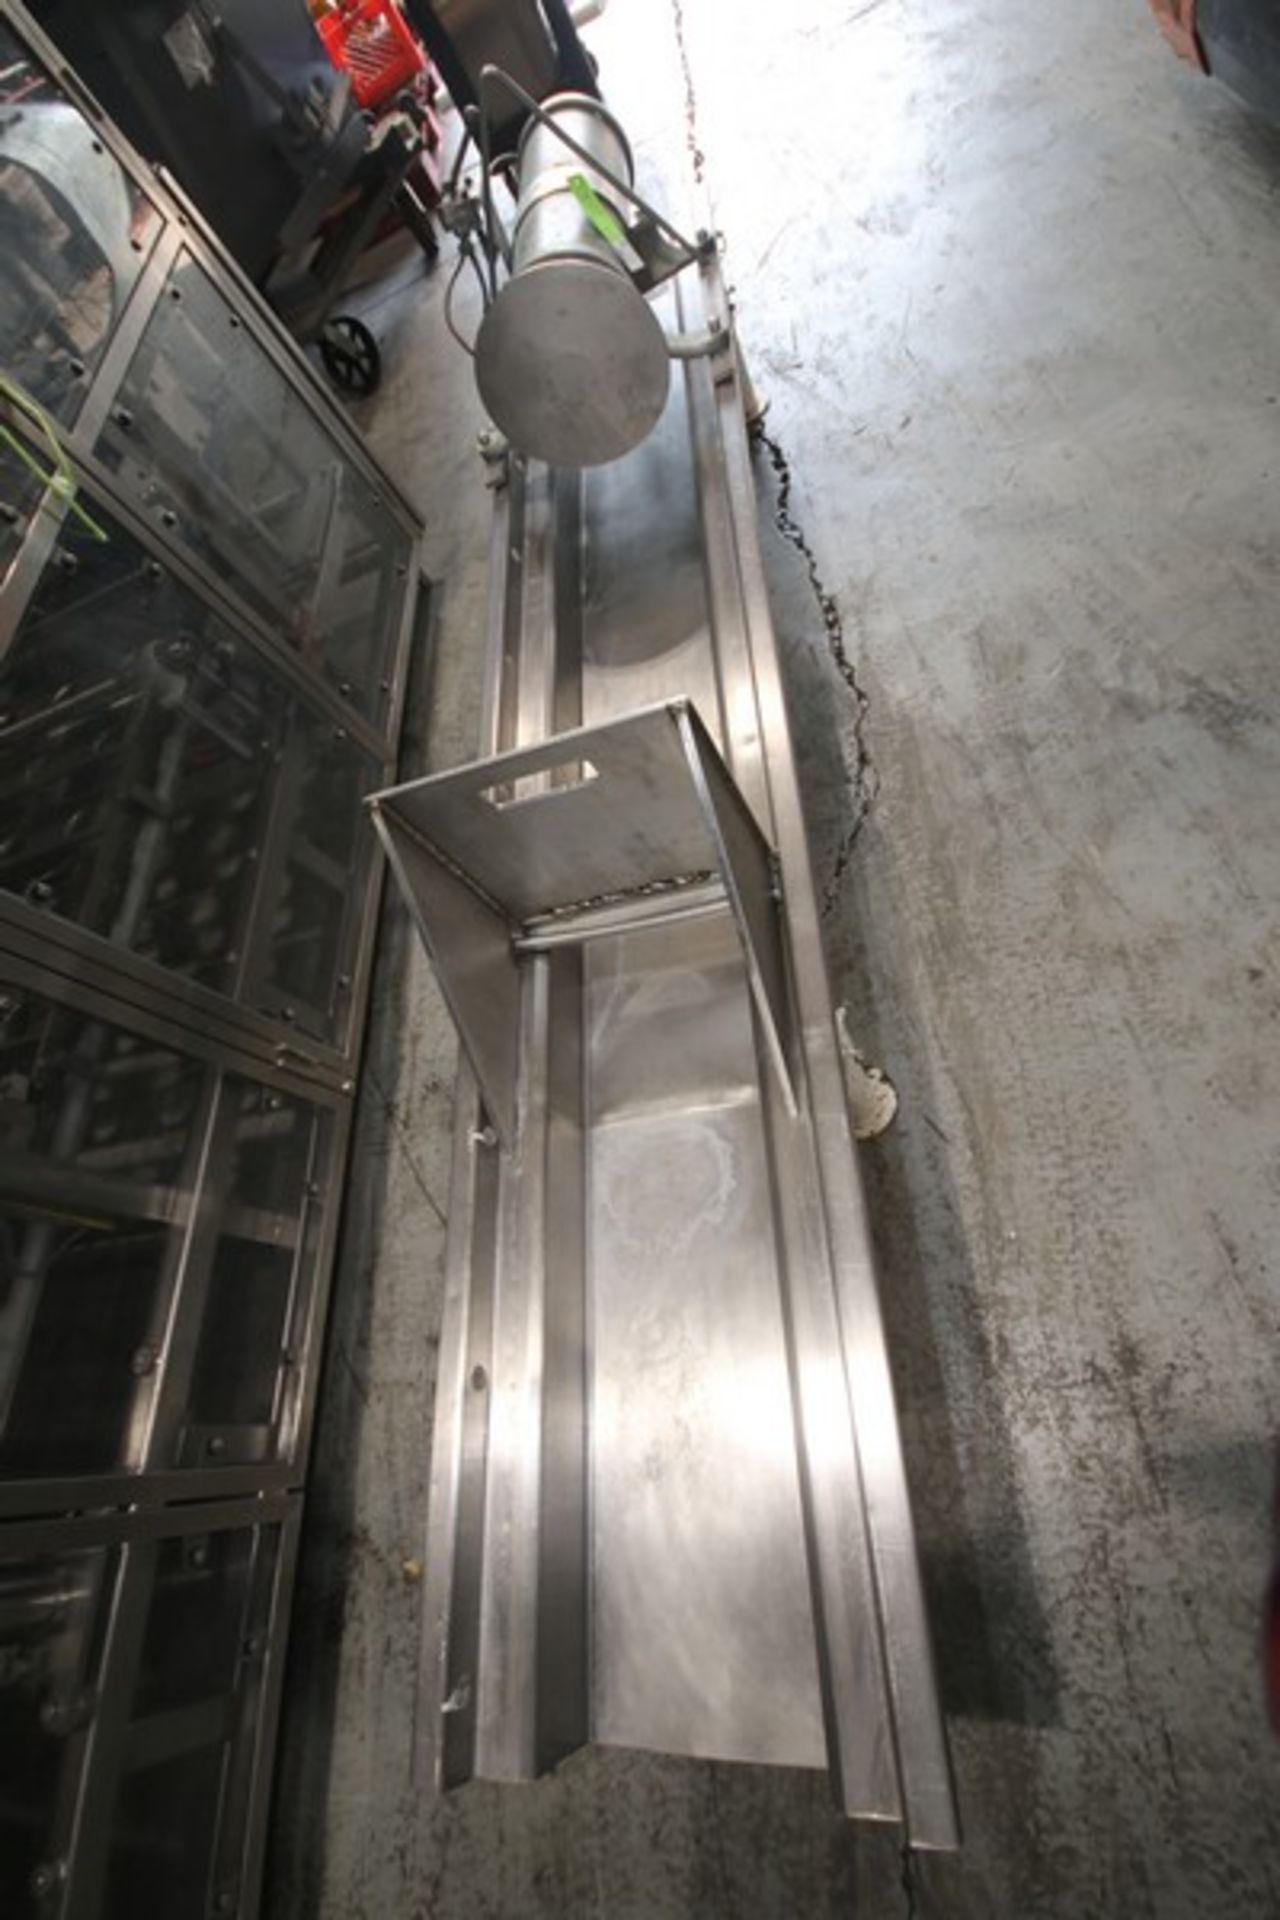 Horizontal Pneumatic S/S Cheese Press, with 12" Plate, (Aprox. Overall Dims. 101" L x 20" W x 30" H) - Image 2 of 4